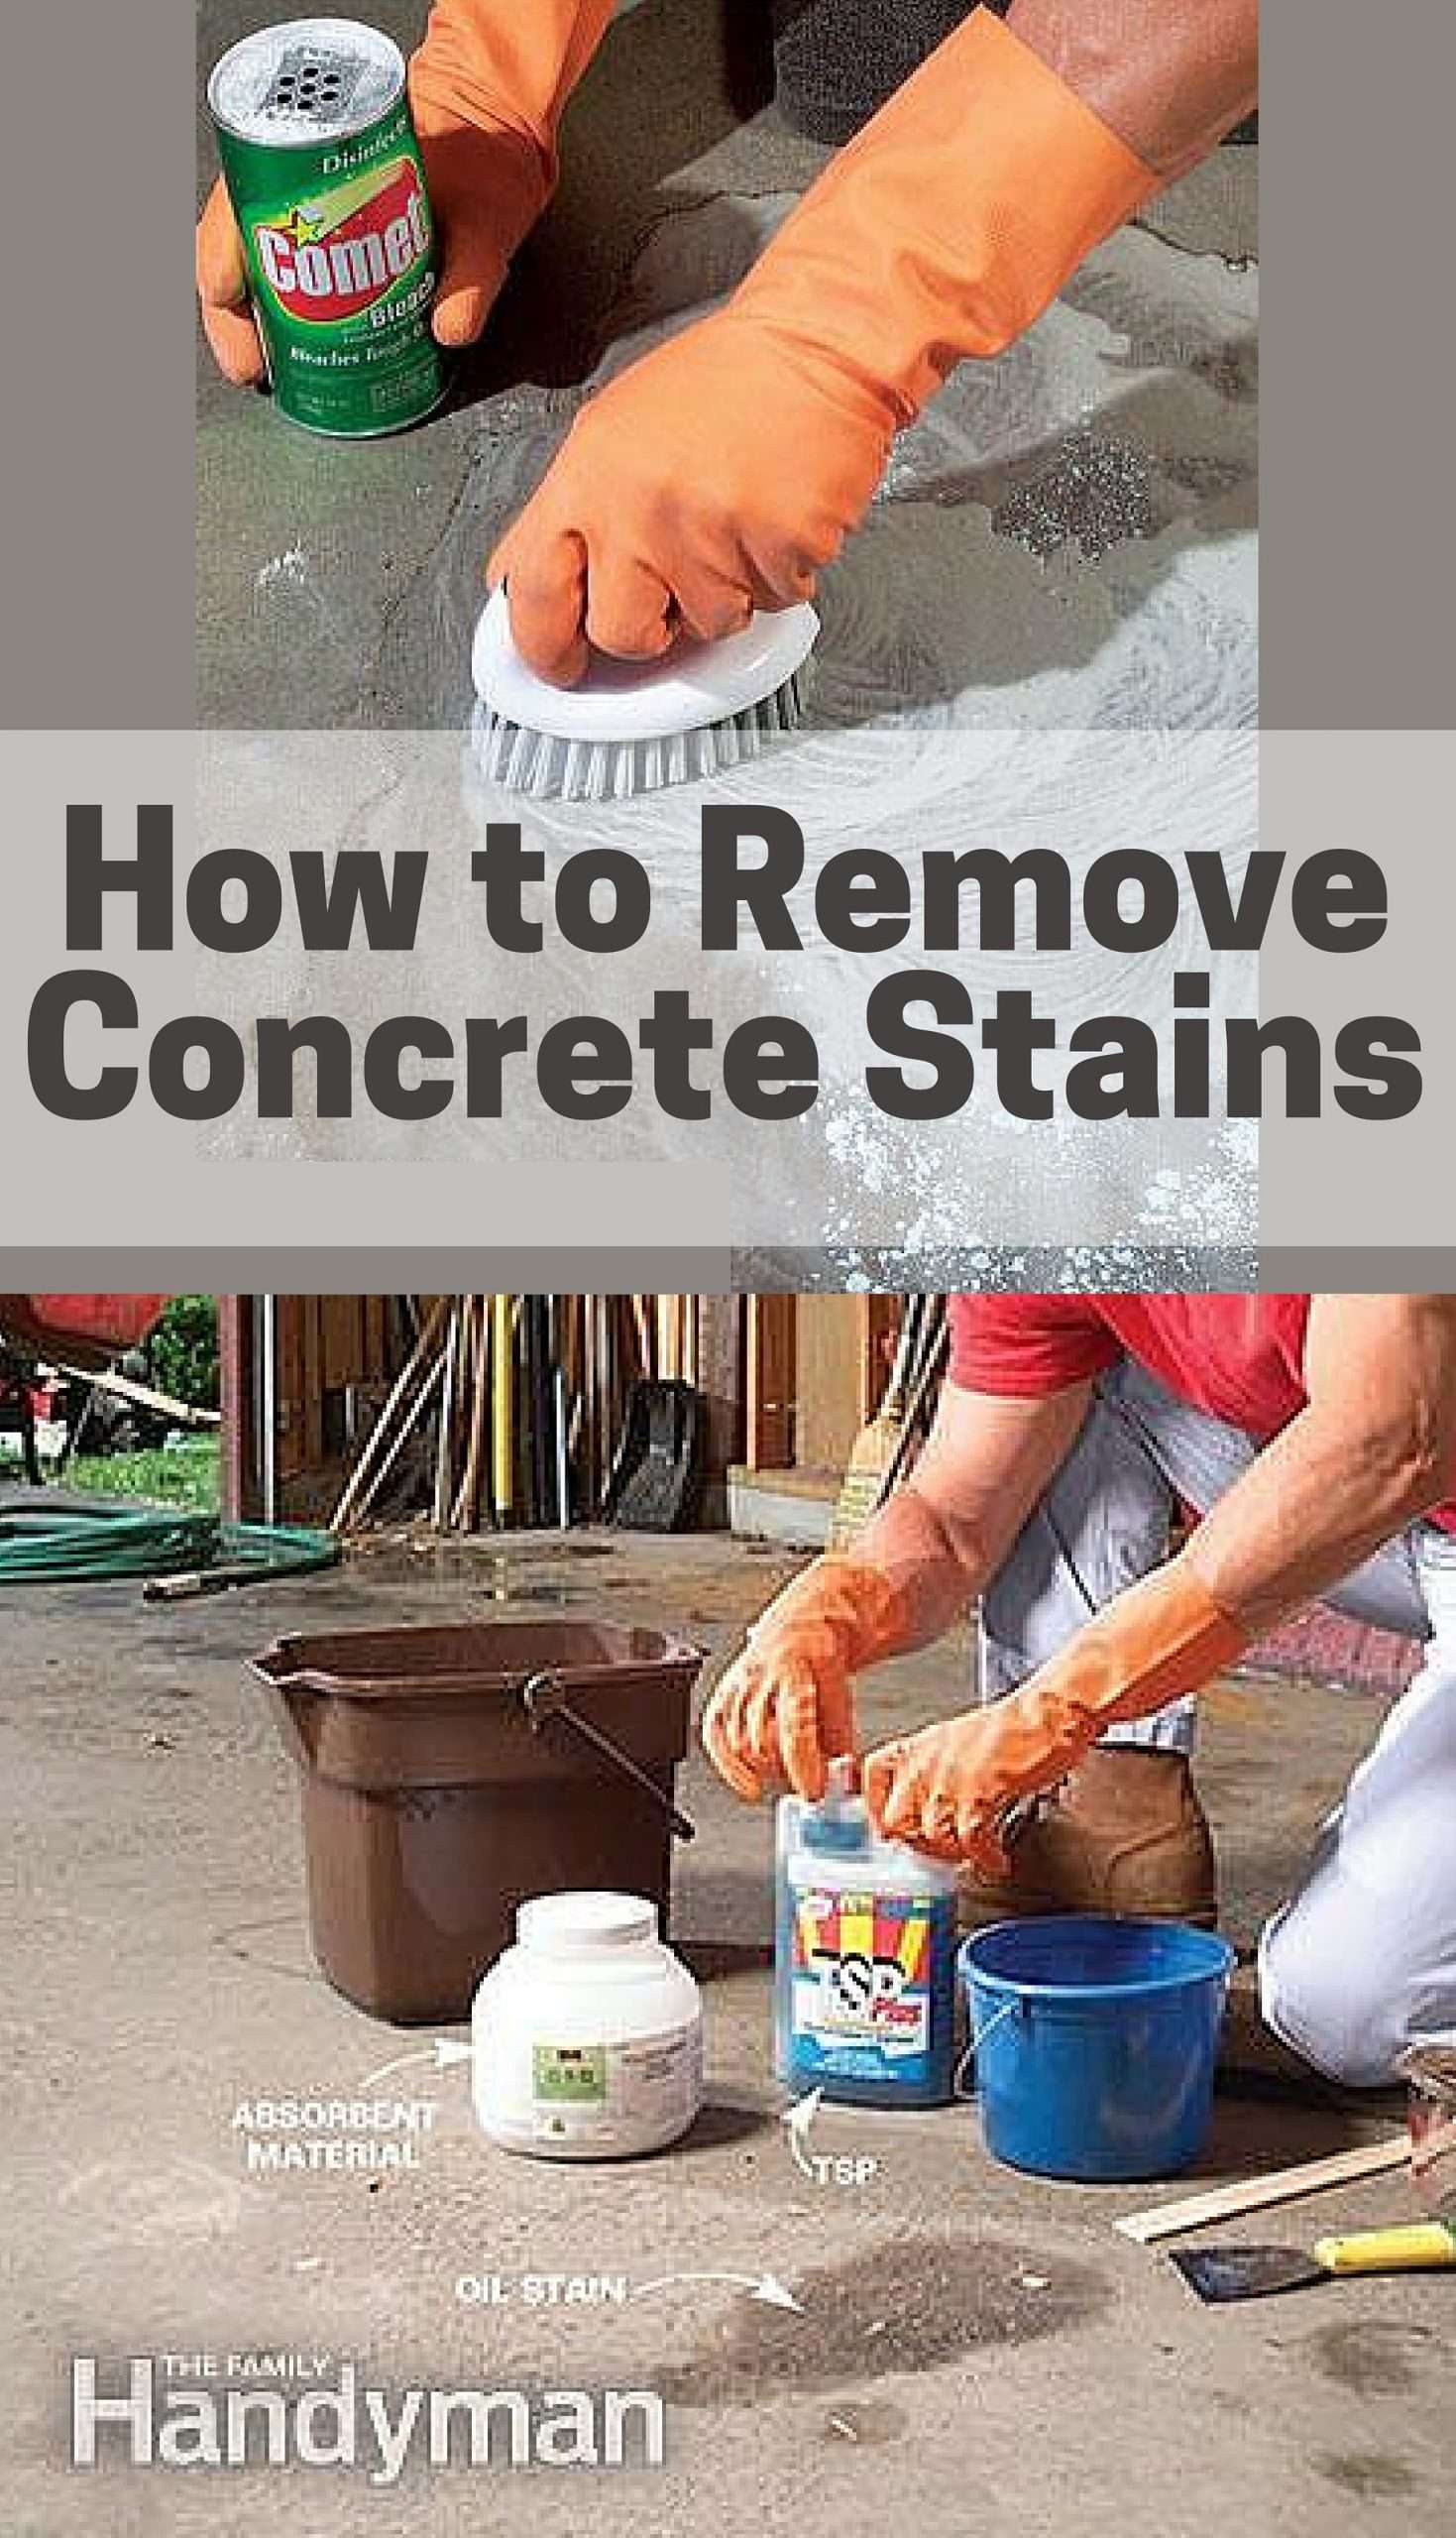 Wood Stain Off Concrete Patio, How To Get Wood Stain Out Of Concrete Patio Slabs